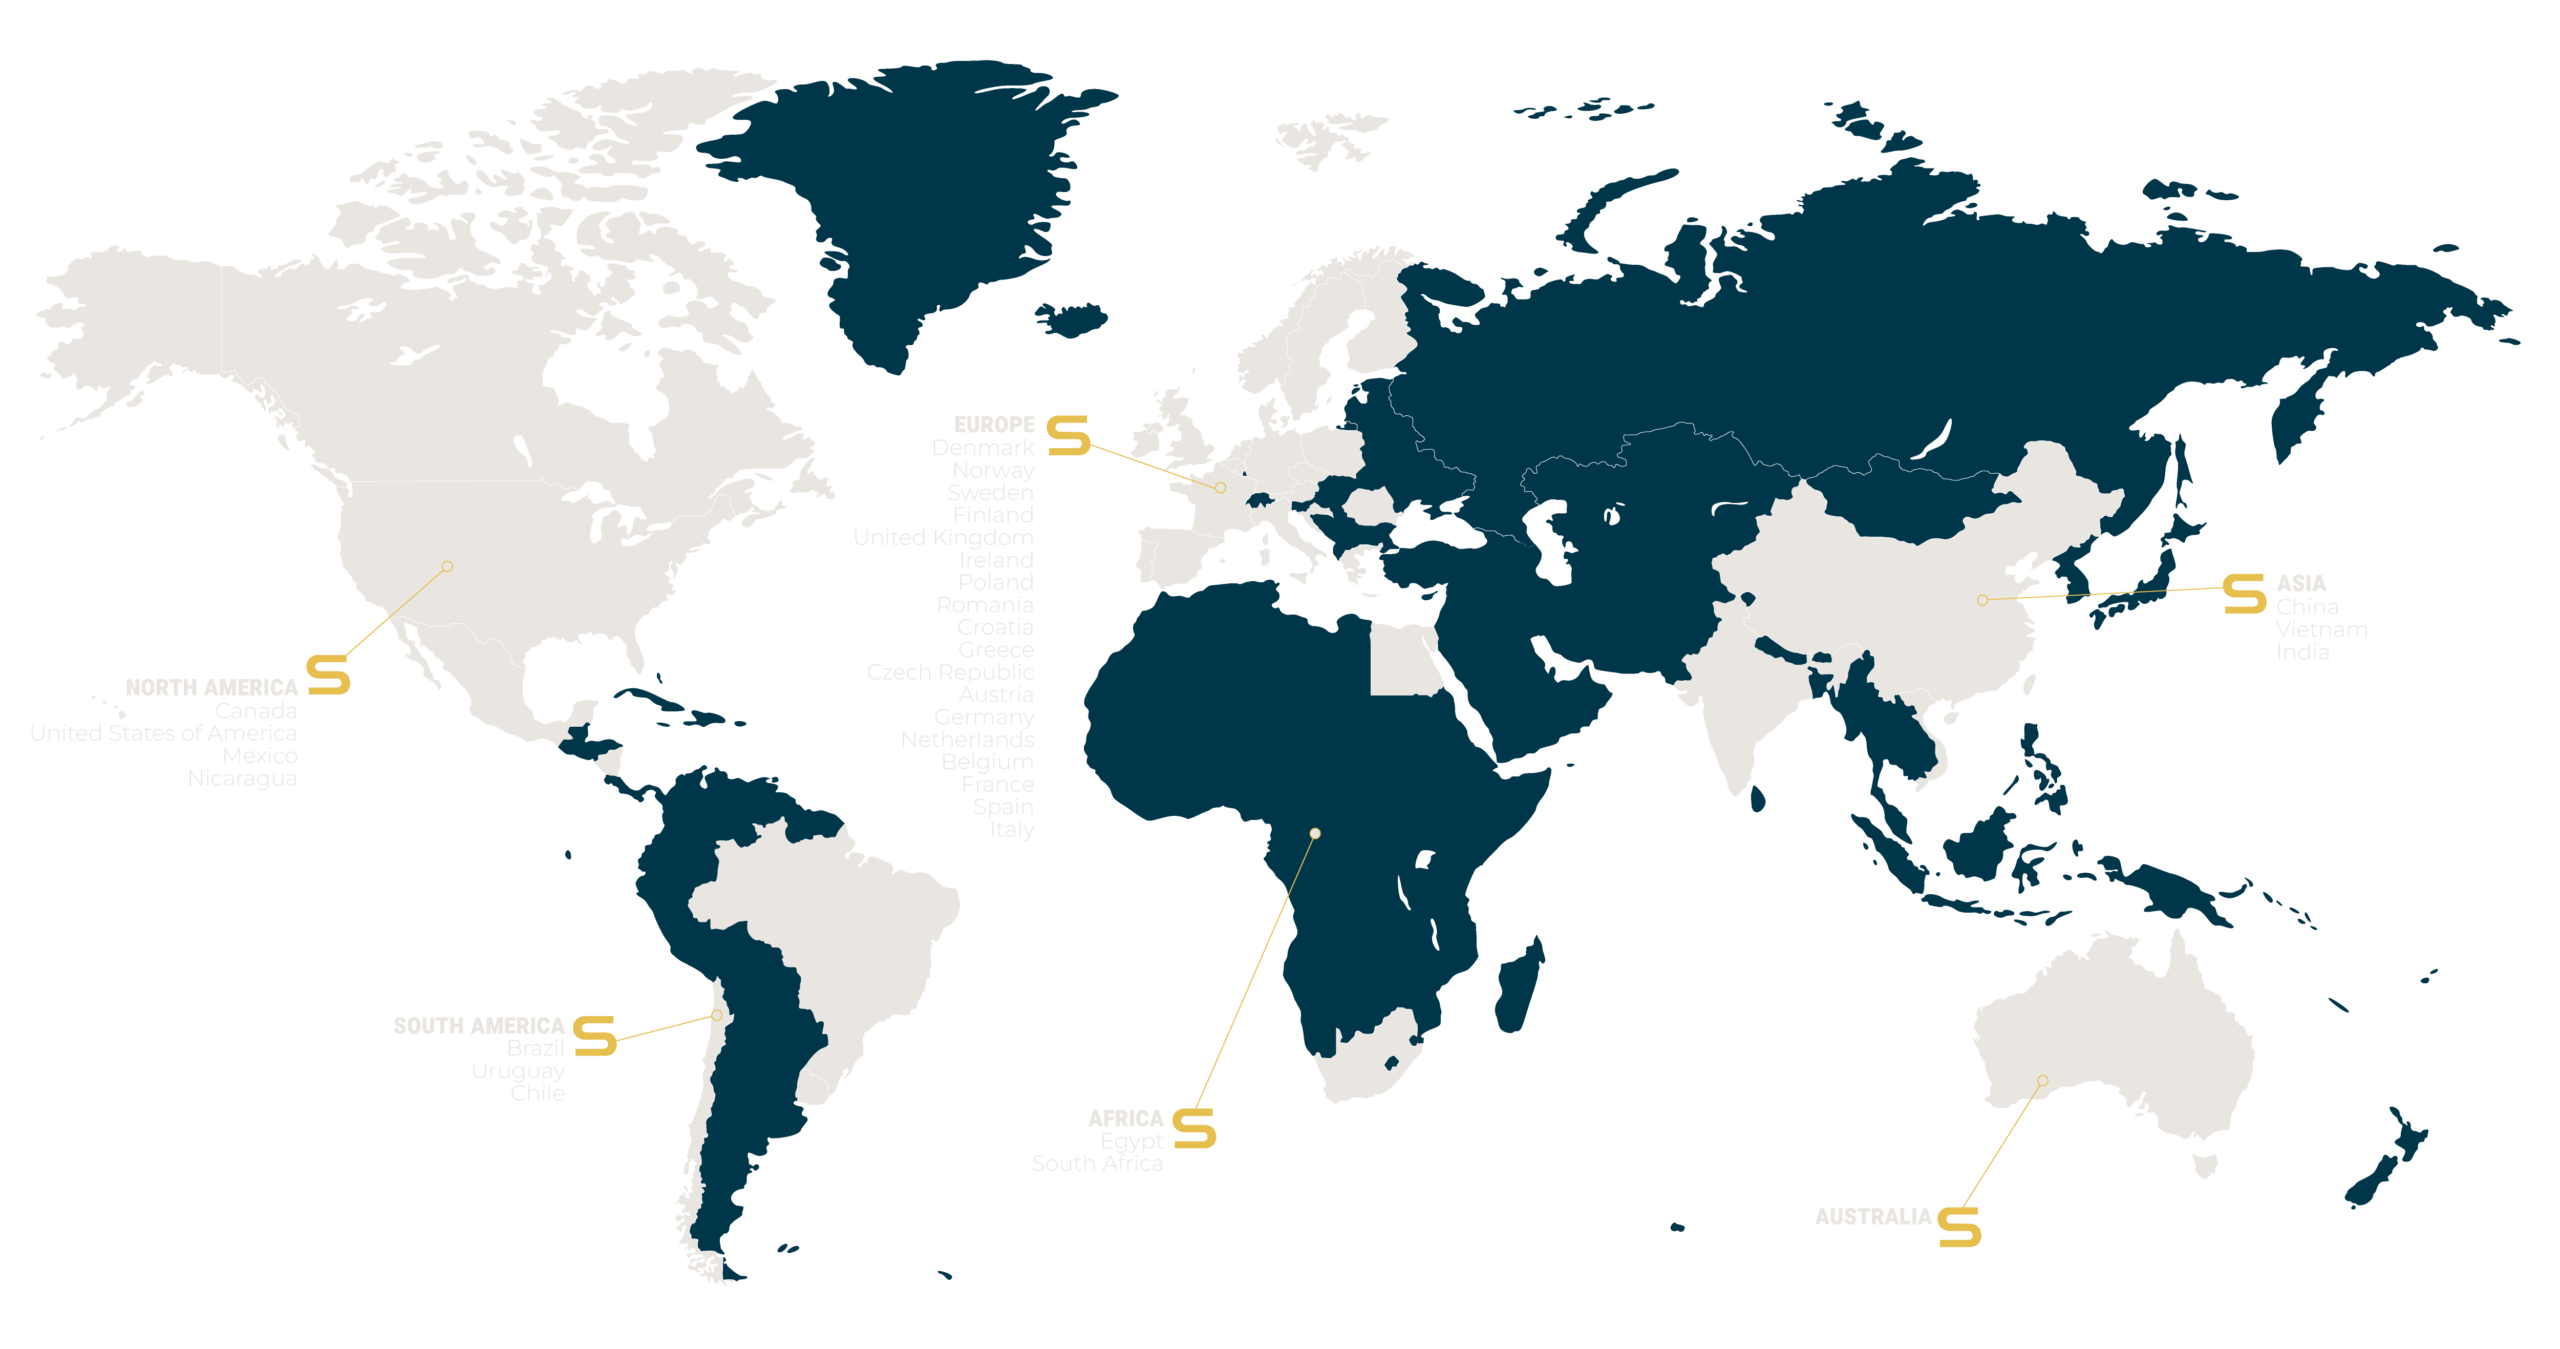 A project map illustrating the geographic reach of a company that specializes in SCADA systems. The map showcases various ongoing and completed projects across different regions, represented by markers of varying colors and sizes.